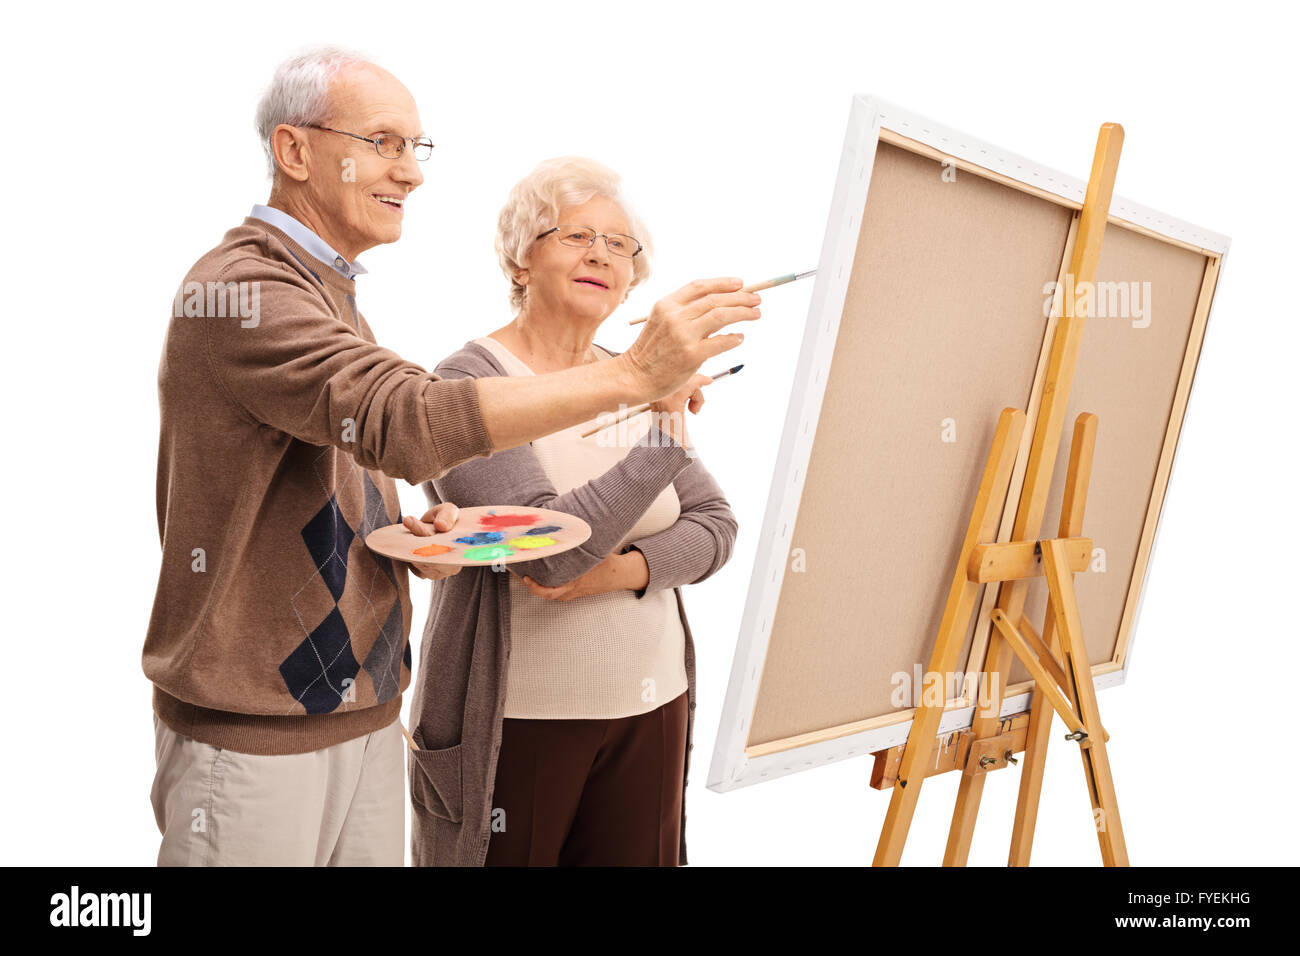 Elderly Couple Painting On A Canvas Together With Paintbrushes Isolated On White Background Stock Photo Alamy